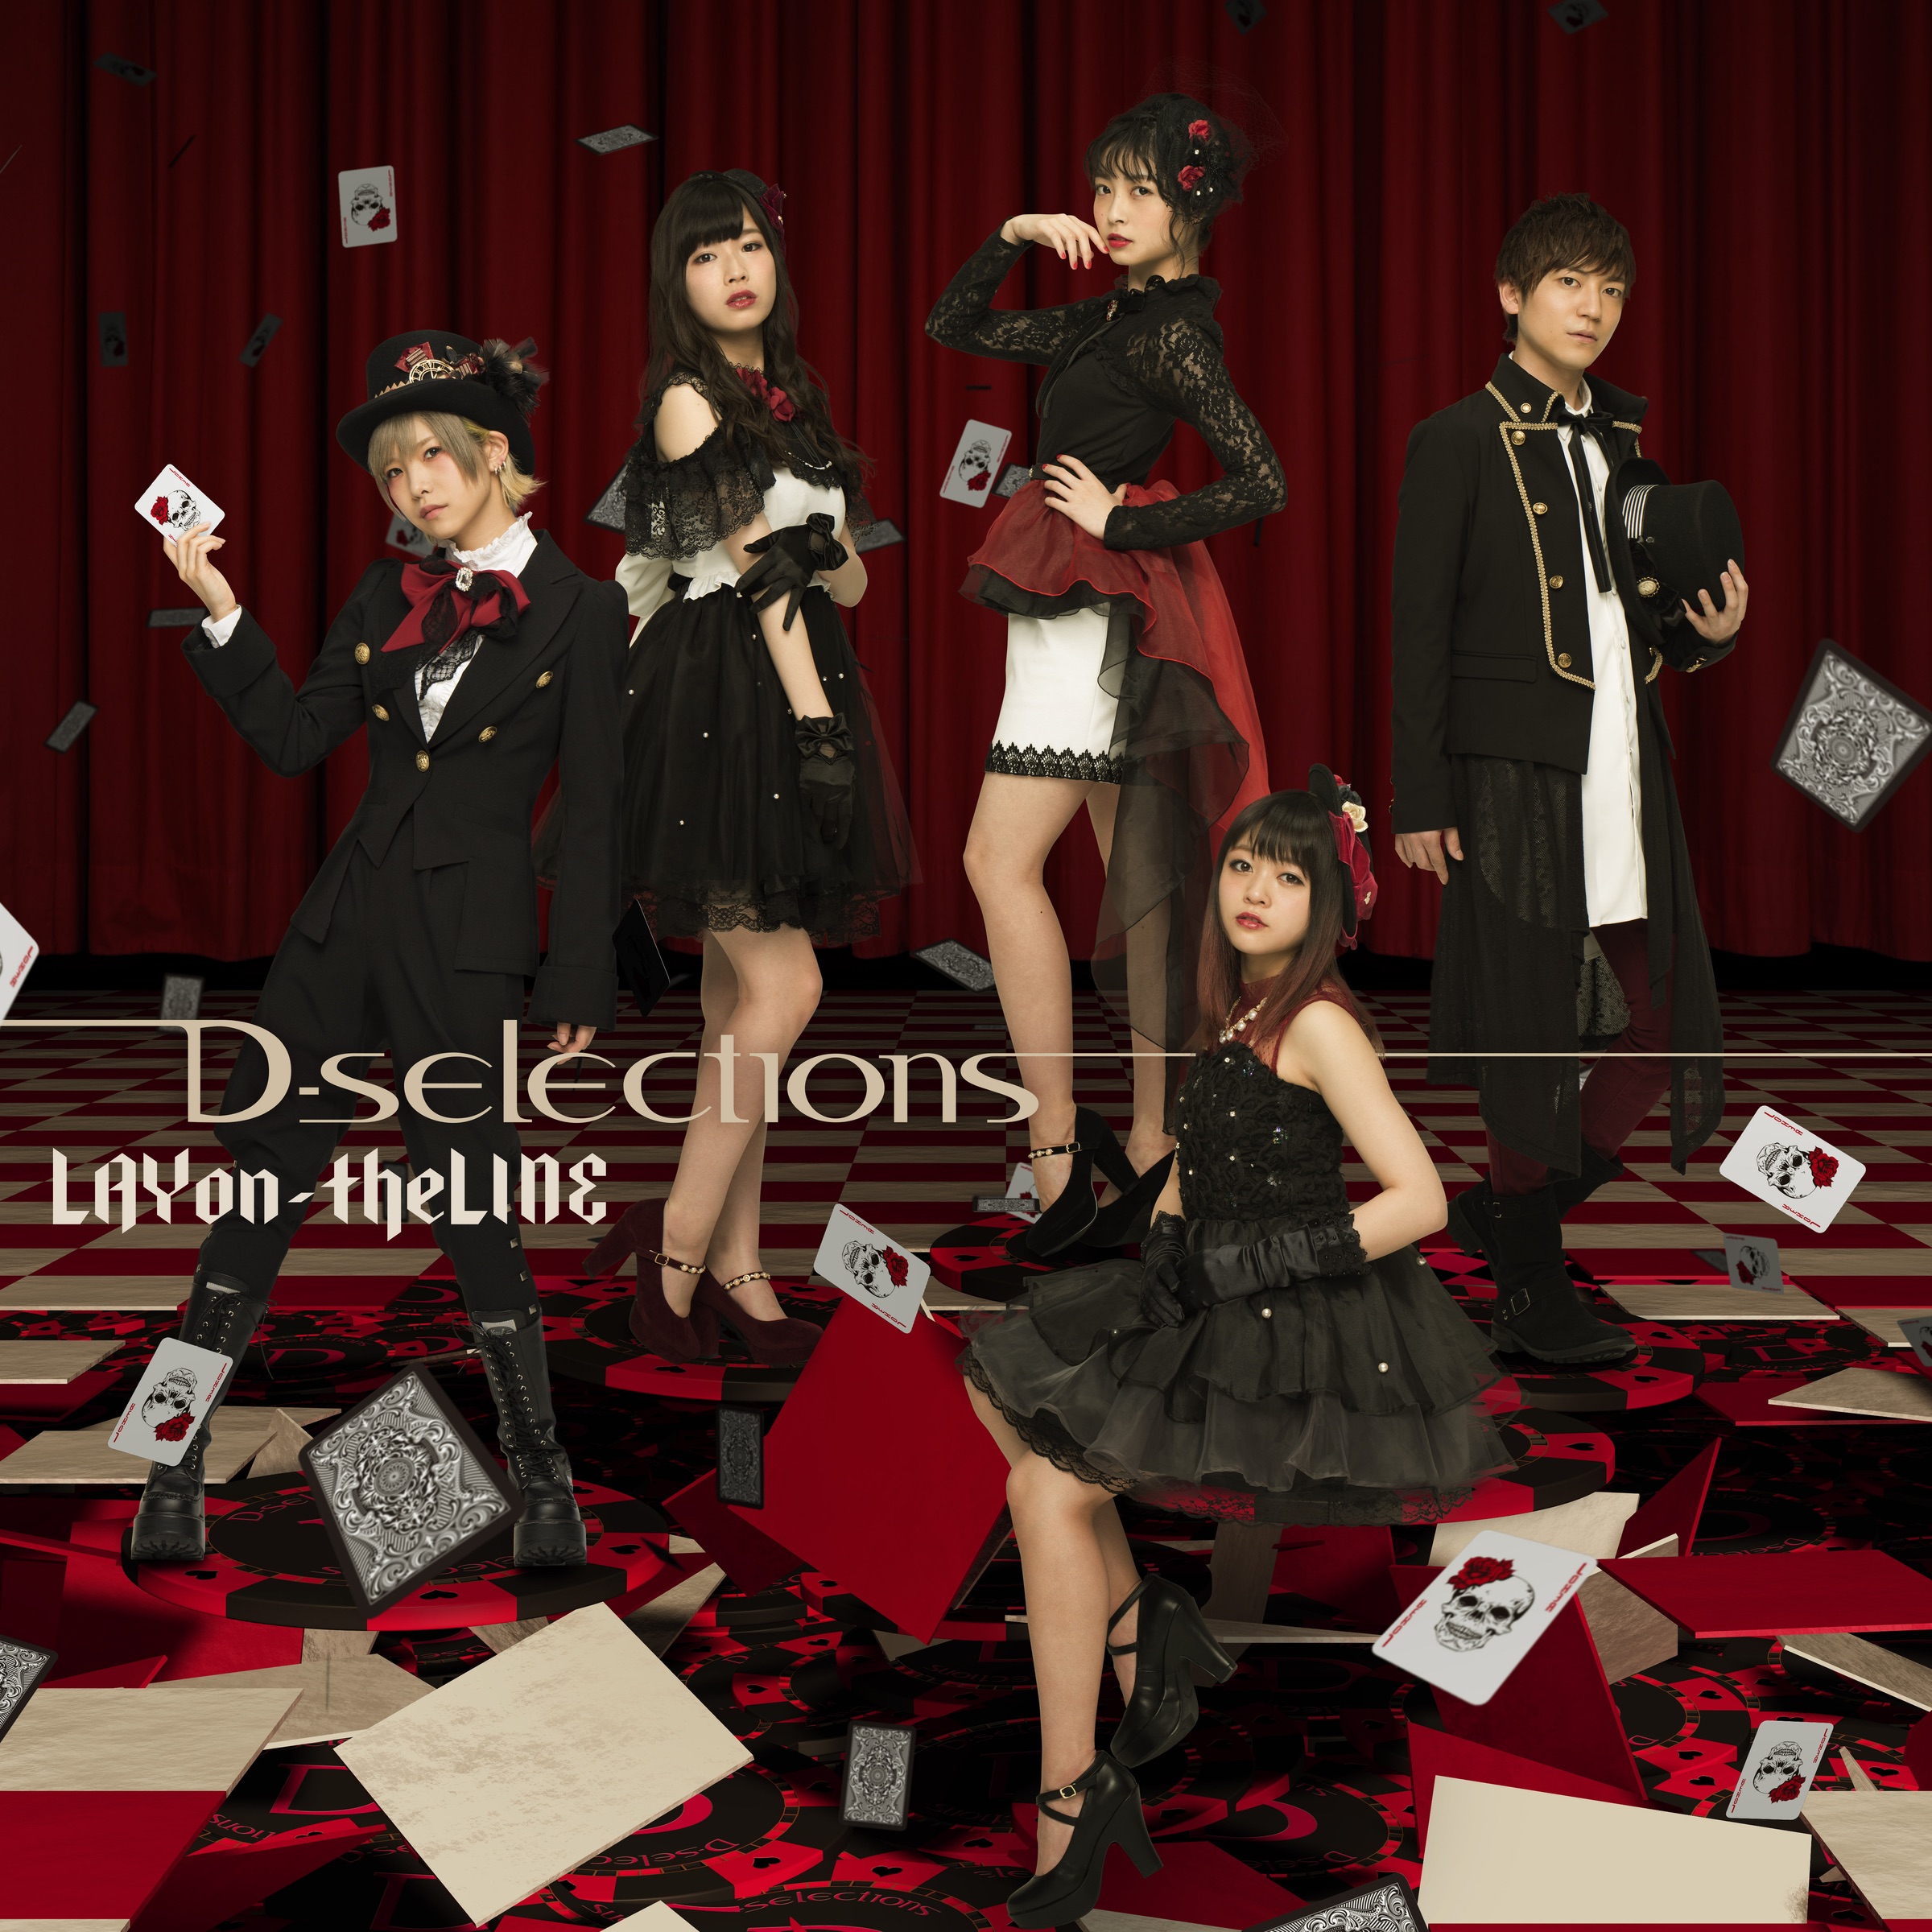 D-selections — LAYon-theLINE cover artwork